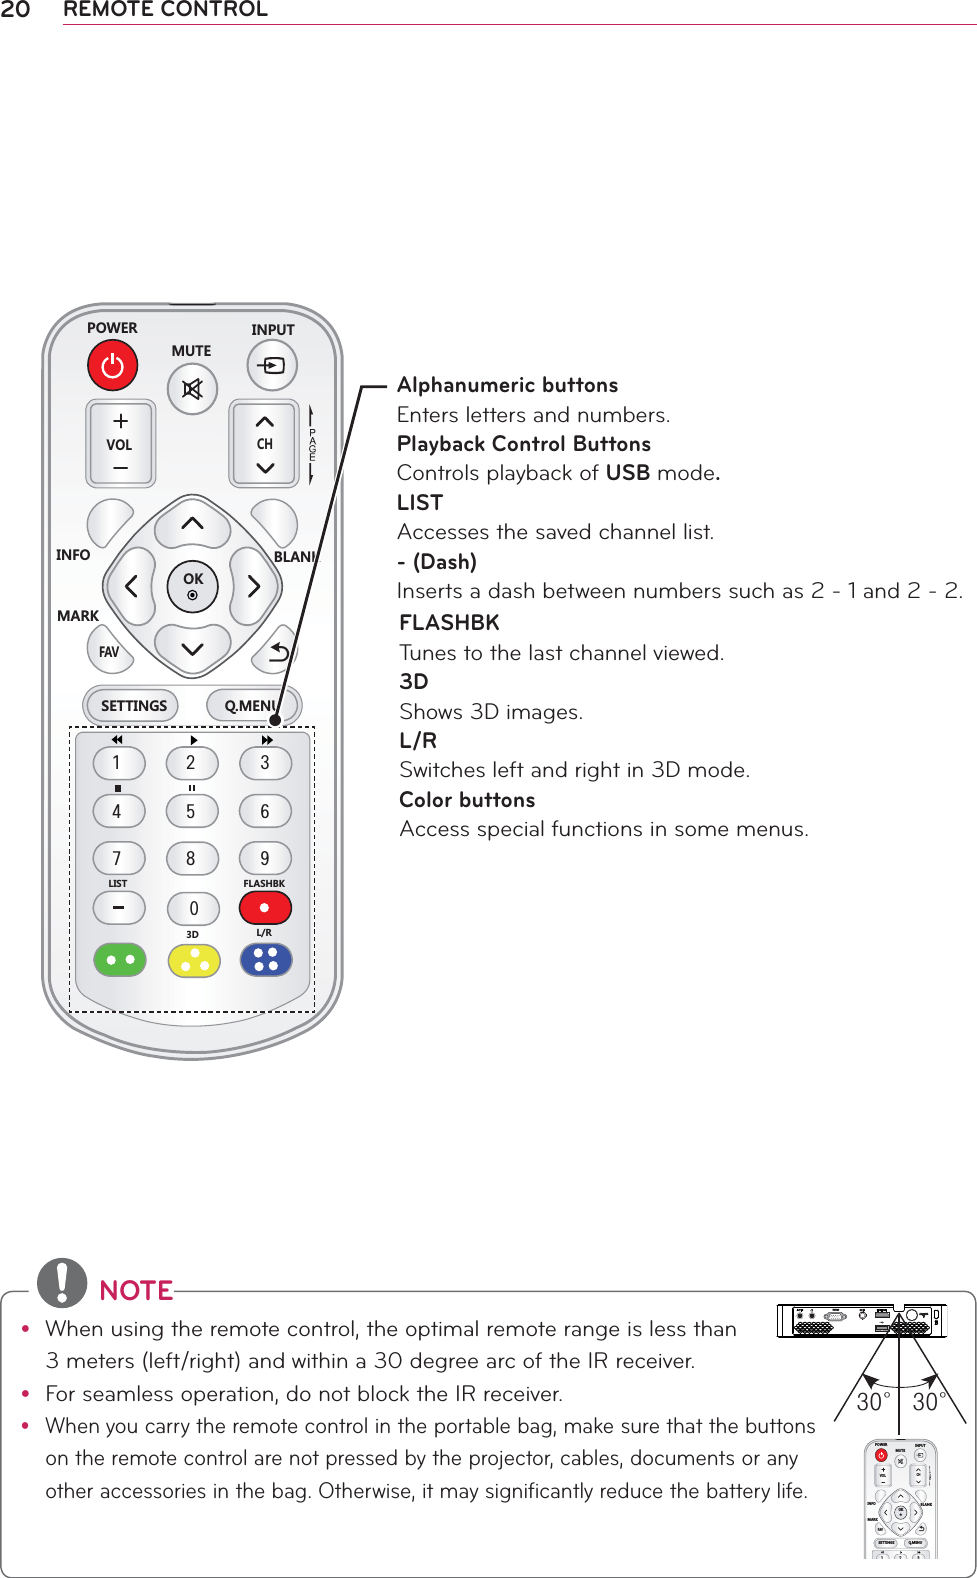 20 REMOTE CONTROL219&apos;4/76&apos;+027681.%*+0(1 $.#0-/#4-ꕣ5&apos;66+0)5 3/&apos;071&amp; .41-(#8(.#5*$-.+56234567890 NOTEy When using the remote control, the optimal remote range is less than  3 meters (left/right) and within a 30 degree arc of the IR receiver.y For seamless operation, do not block the IR receiver.y When you carry the remote control in the portable bag, make sure that the buttons on the remote control are not pressed by the projector, cables, documents or any other accessories in the bag. Otherwise, it may significantly reduce the battery life.Alphanumeric buttonsEnters letters and numbers.Playback Control ButtonsControls playback of USB mode.LISTAccesses the saved channel list.- (Dash)Inserts a dash between numbers such as 2 - 1 and 2 - 2.FLASHBKTunes to the last channel viewed.3DShows 3D images.L/R Switches left and right in 3D mode.Color buttonsAccess special functions in some menus.219&apos;4/76&apos;+027681.%*+0(1 $.#0-/#4-ꕣ5&apos;66+0)5 3/&apos;0711-(#82363䮋#63䮋